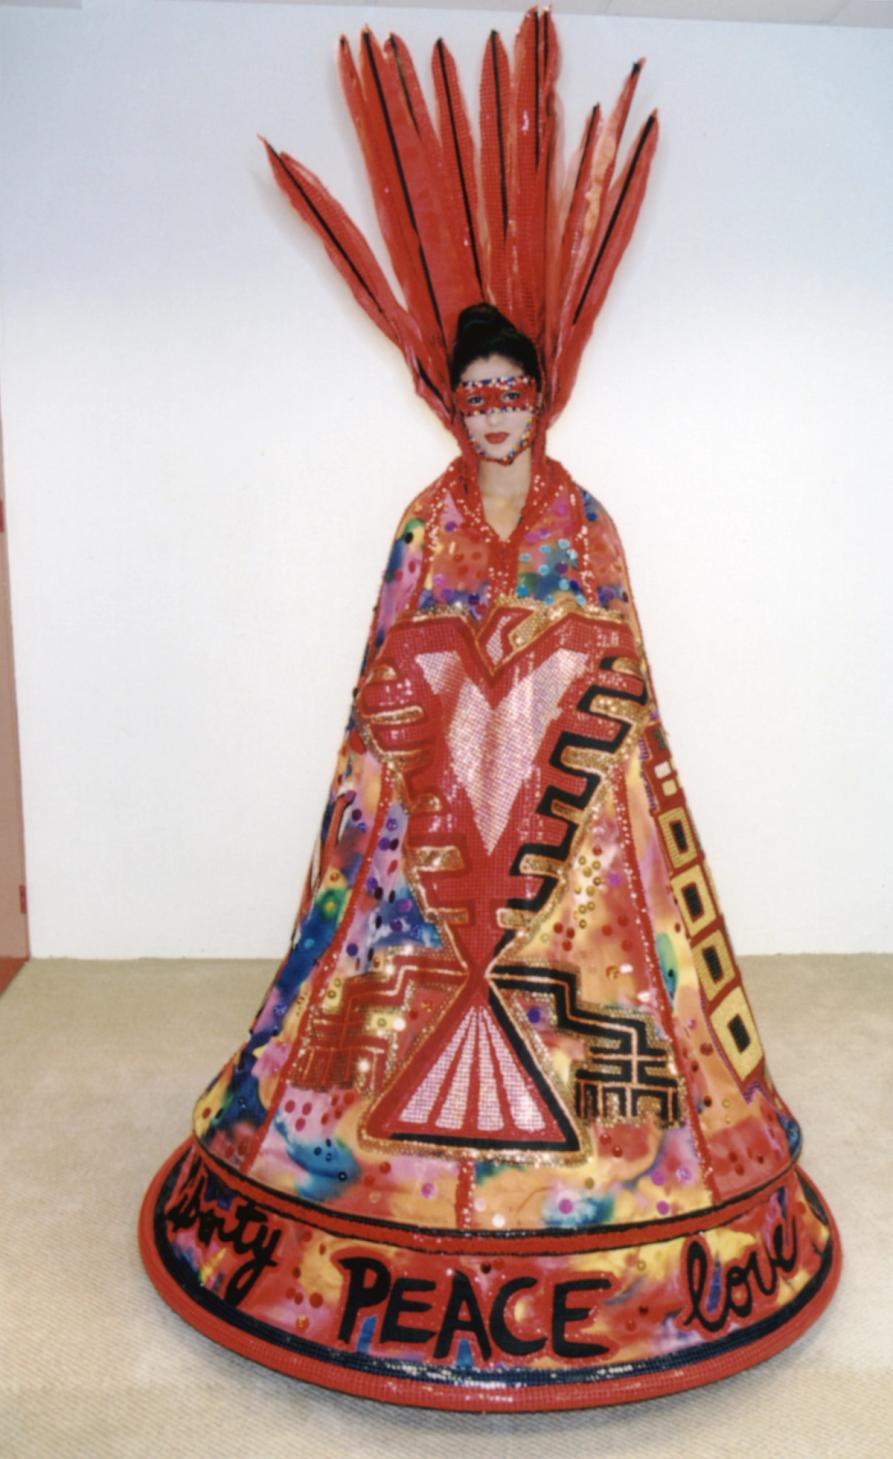 A woman dress in decorative red cloak-like dress with feather head piece and red eye mask.